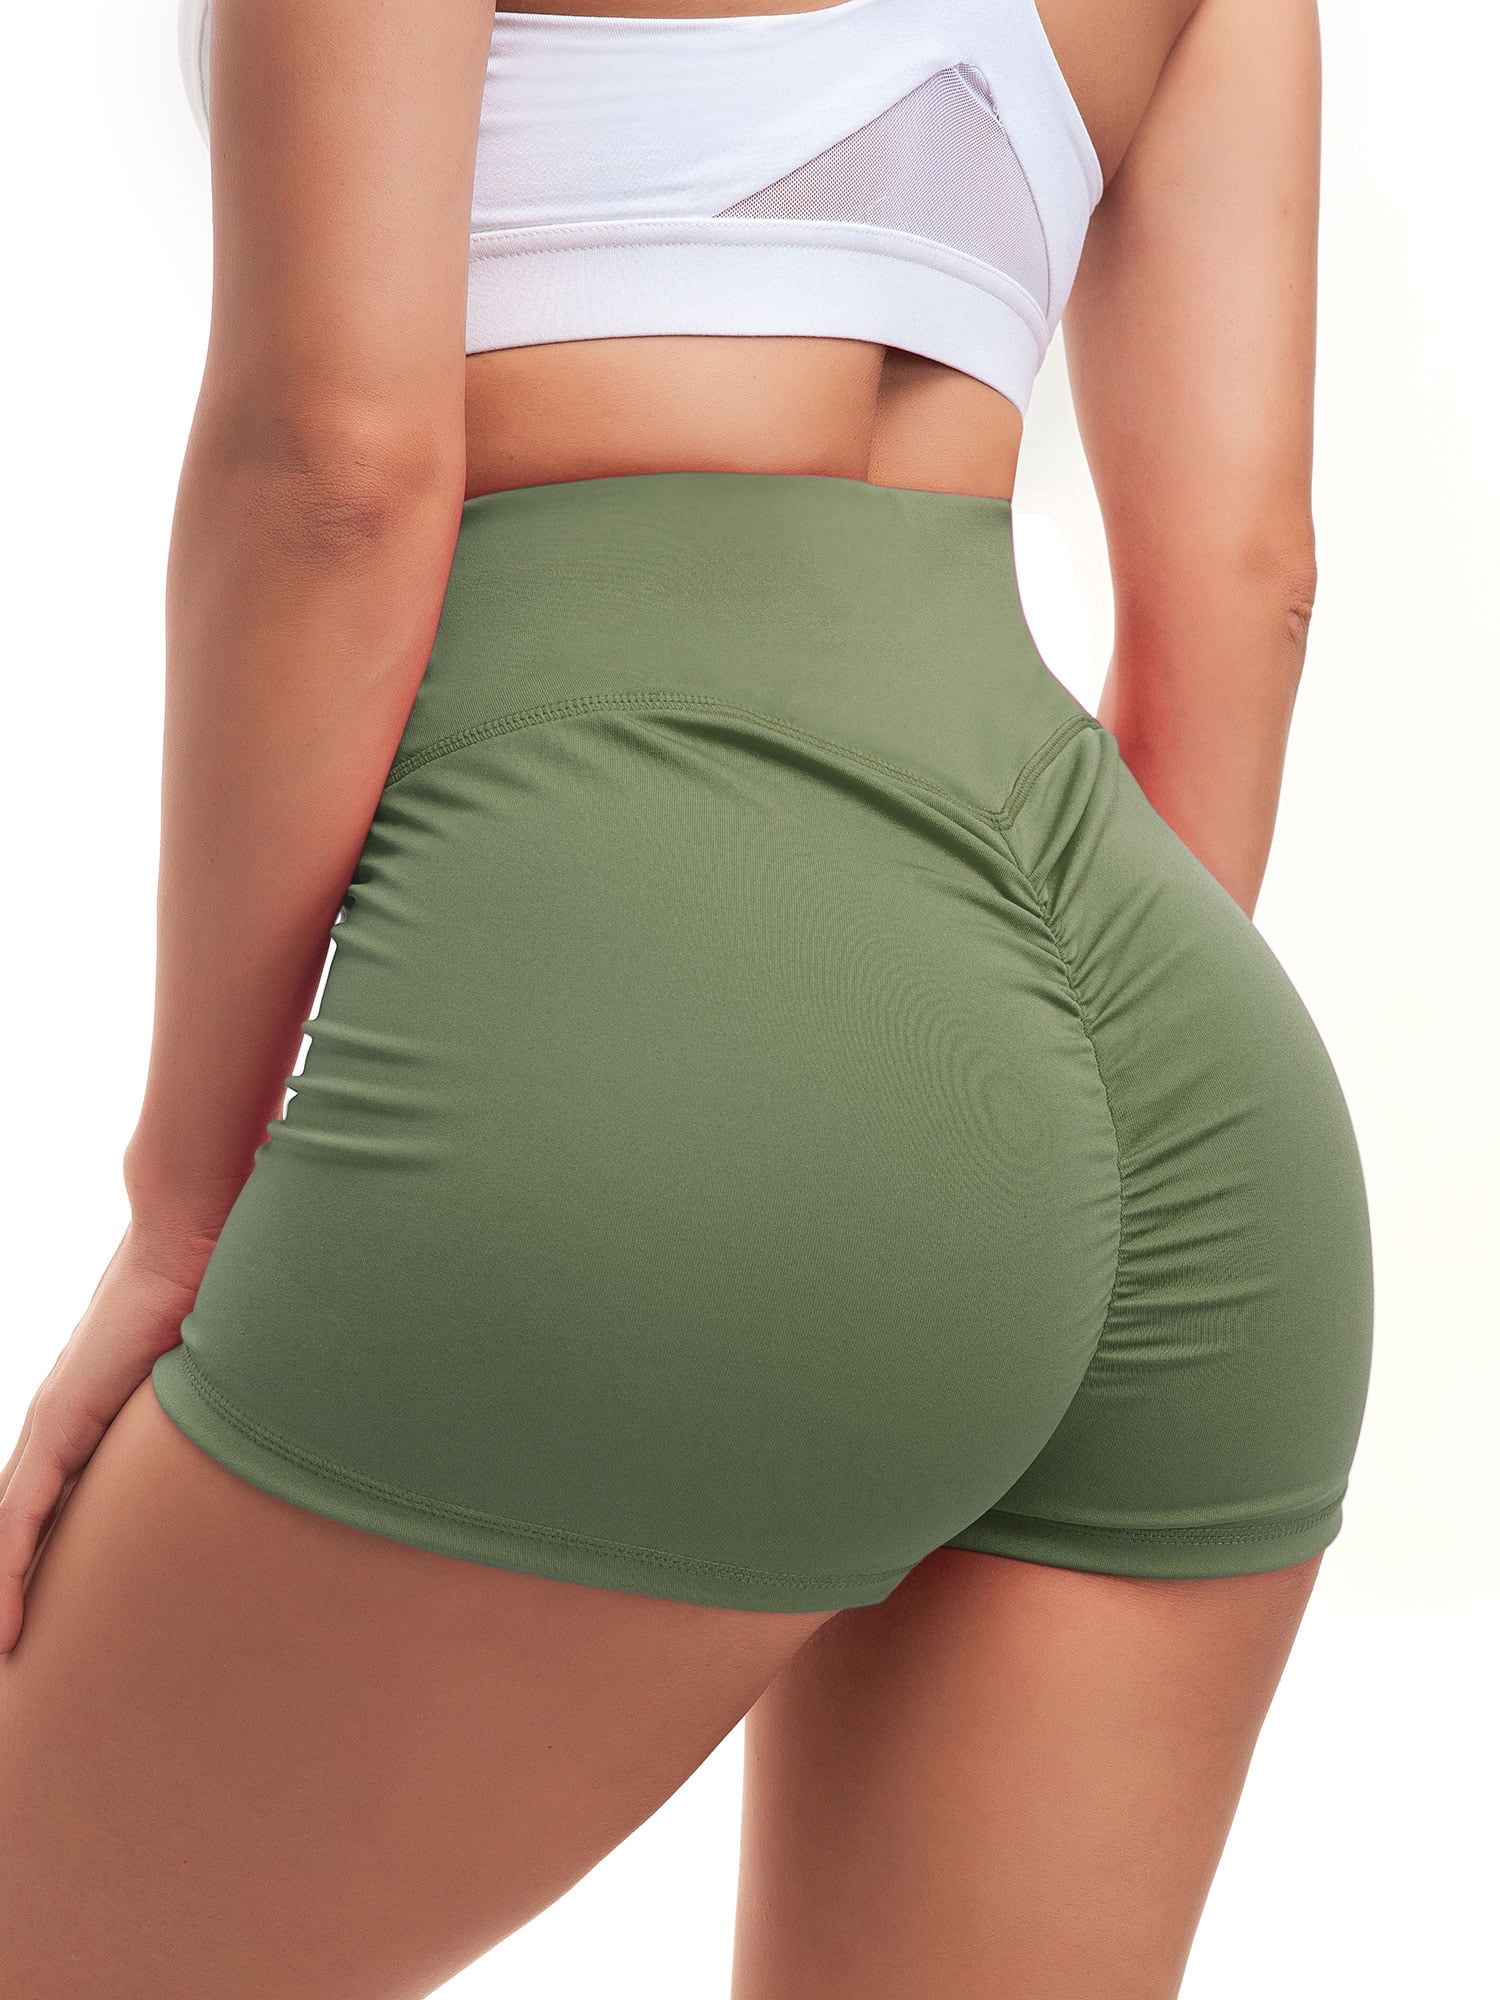 Womens Push Up High Waist Solid Yoga Shorts Sports Casual Gym